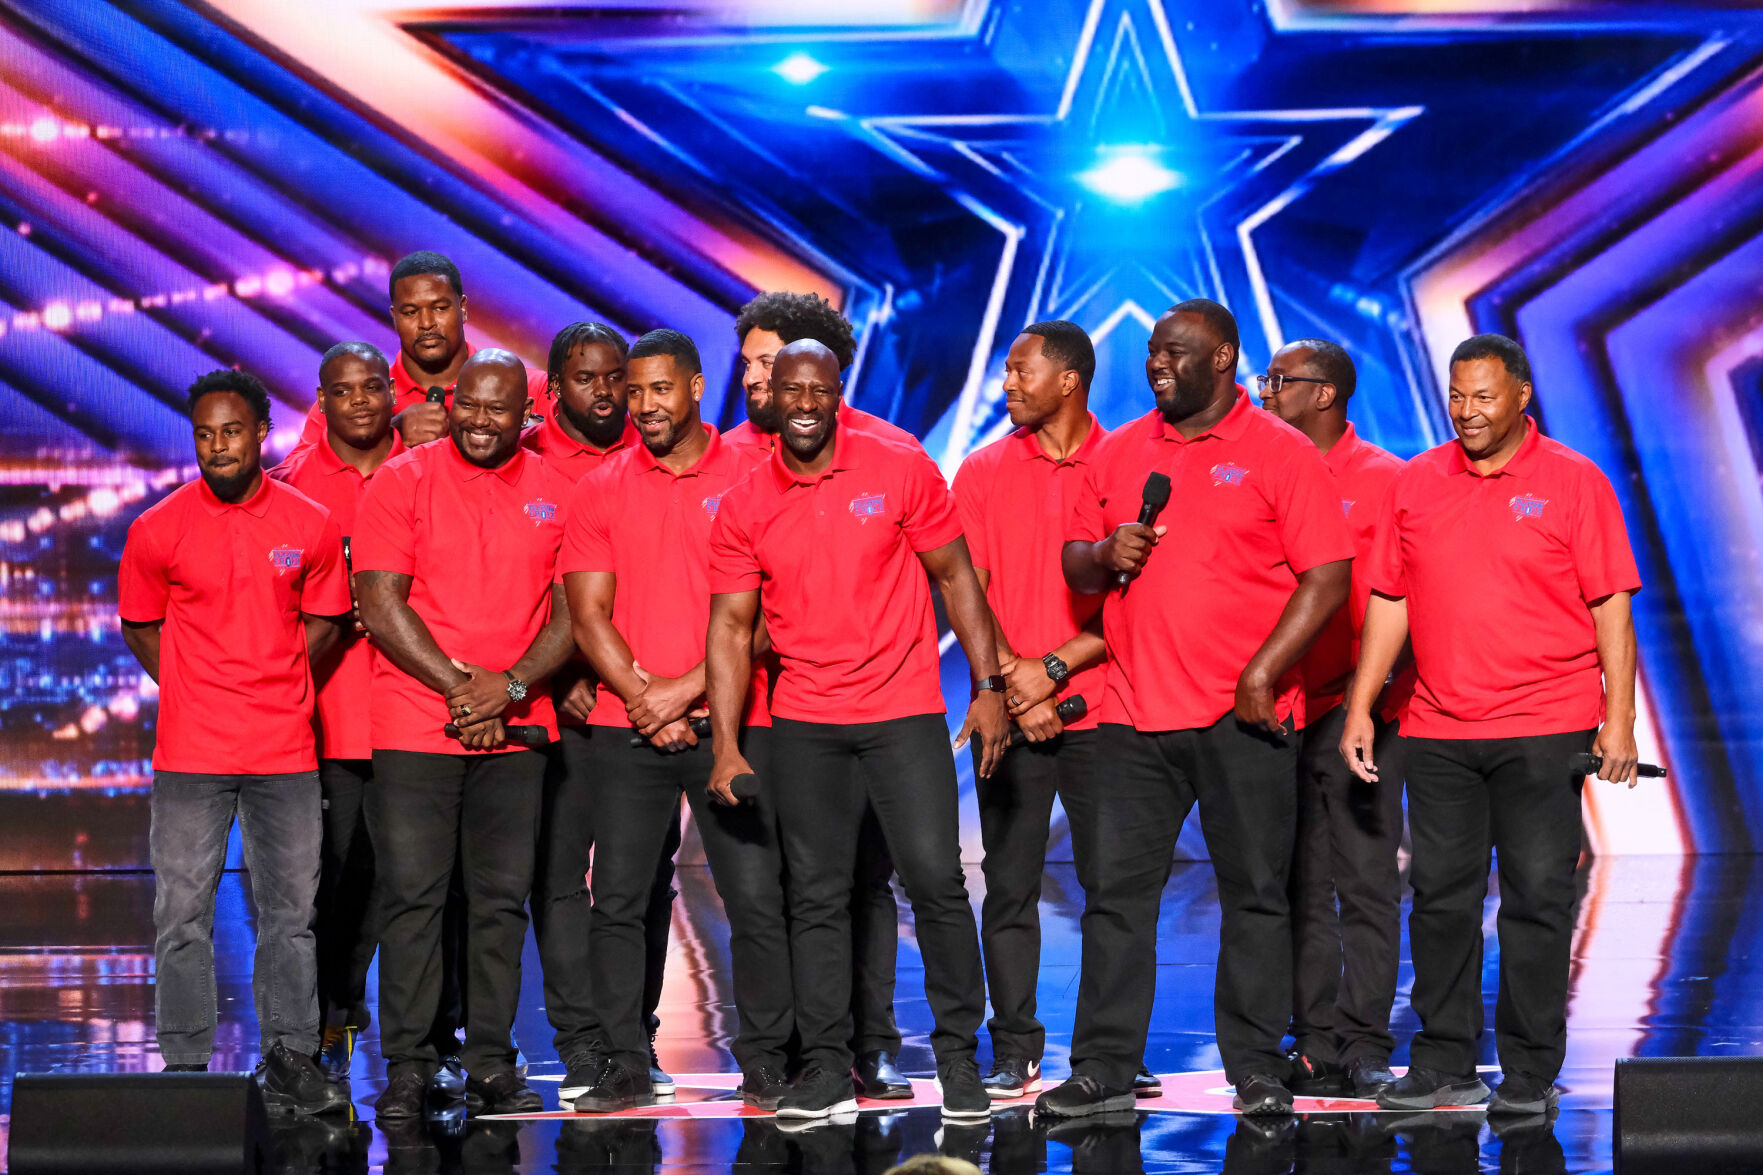 Isaiah McKenzie will not participate in upcoming Americas Got Talent live show